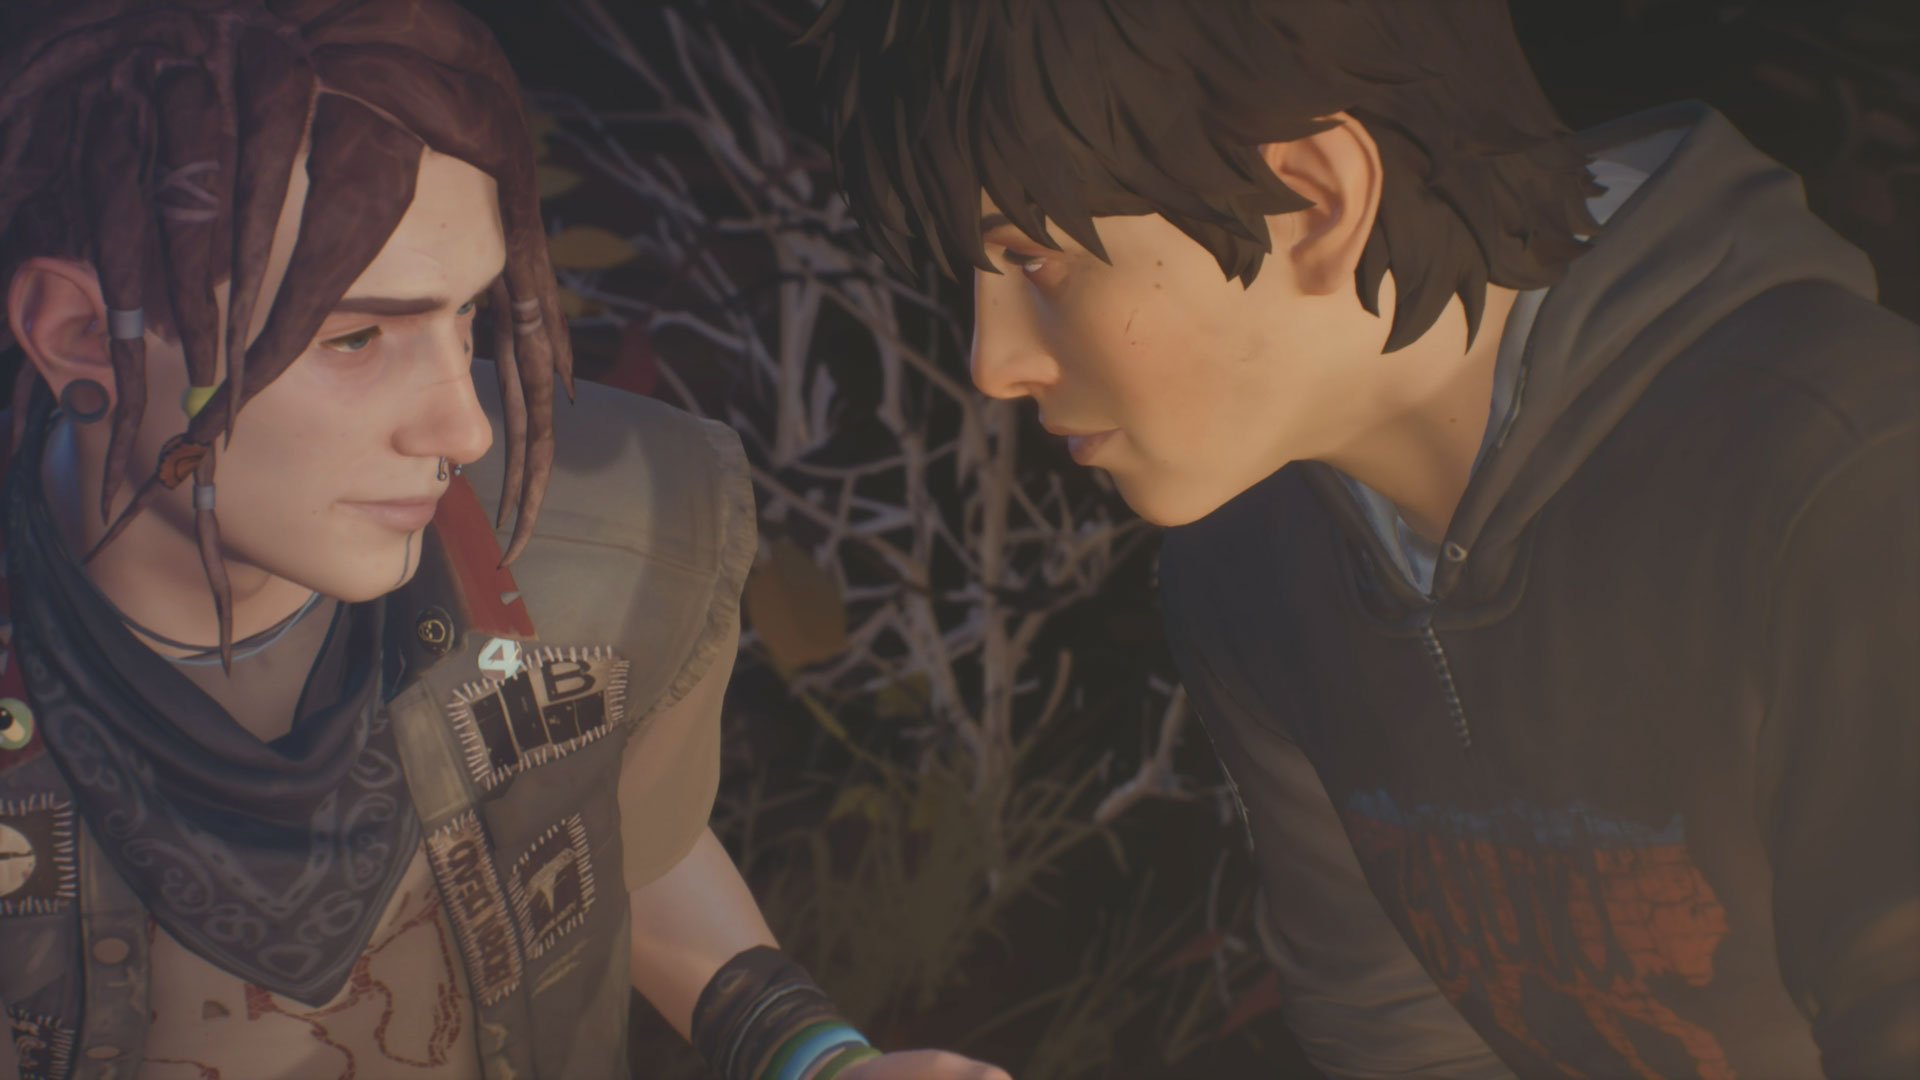 Sean And Finn Life Is Strange 2 Wallpapers - Wallpaper Cave.